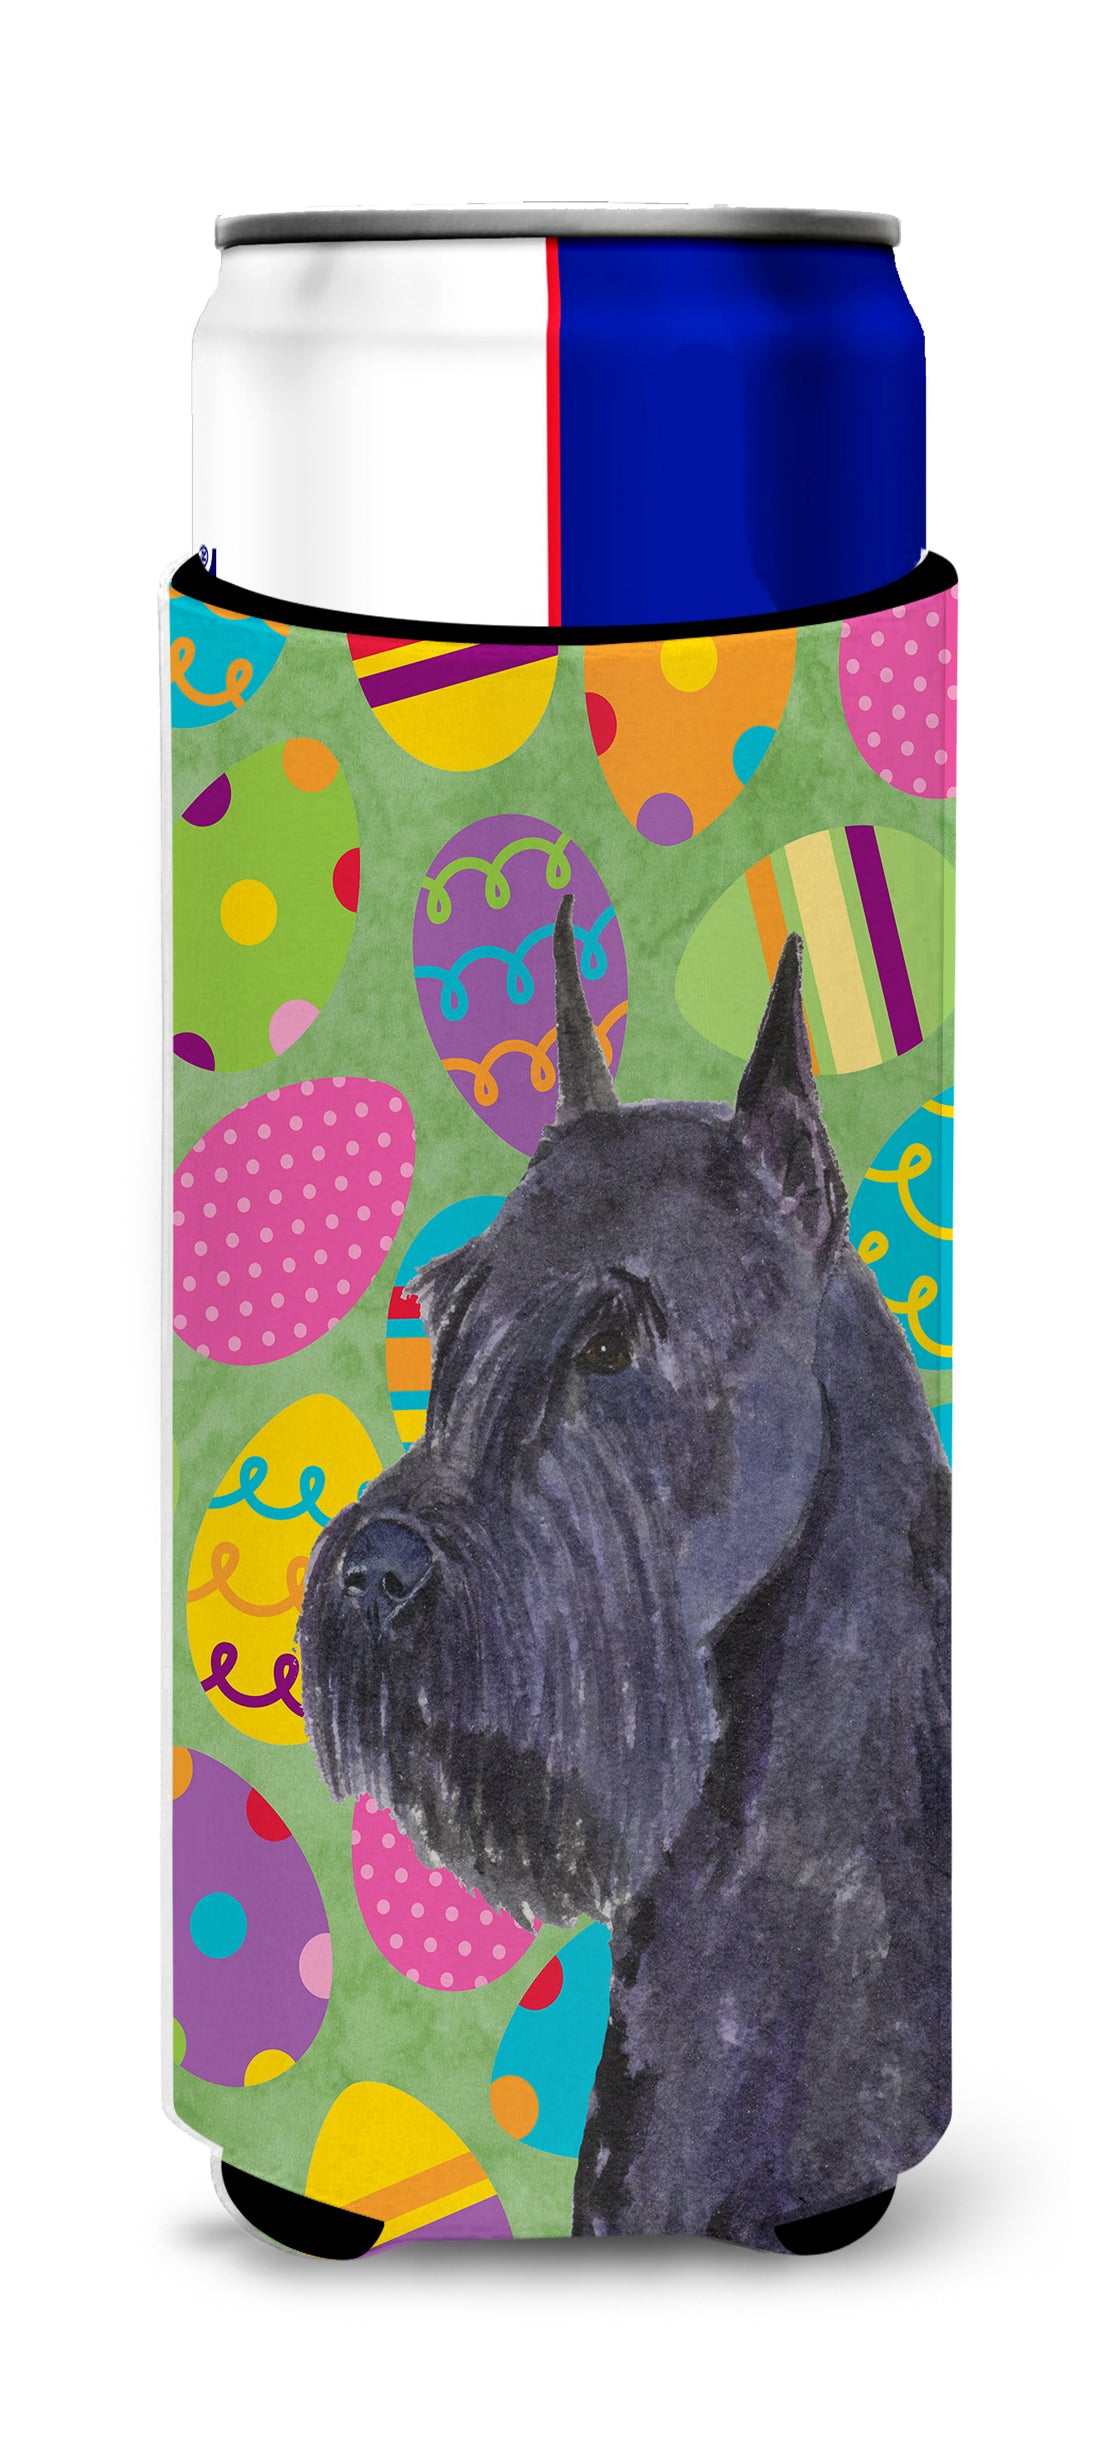 Schnauzer Easter Eggtravaganza Ultra Beverage Insulators for slim cans SS4868MUK.